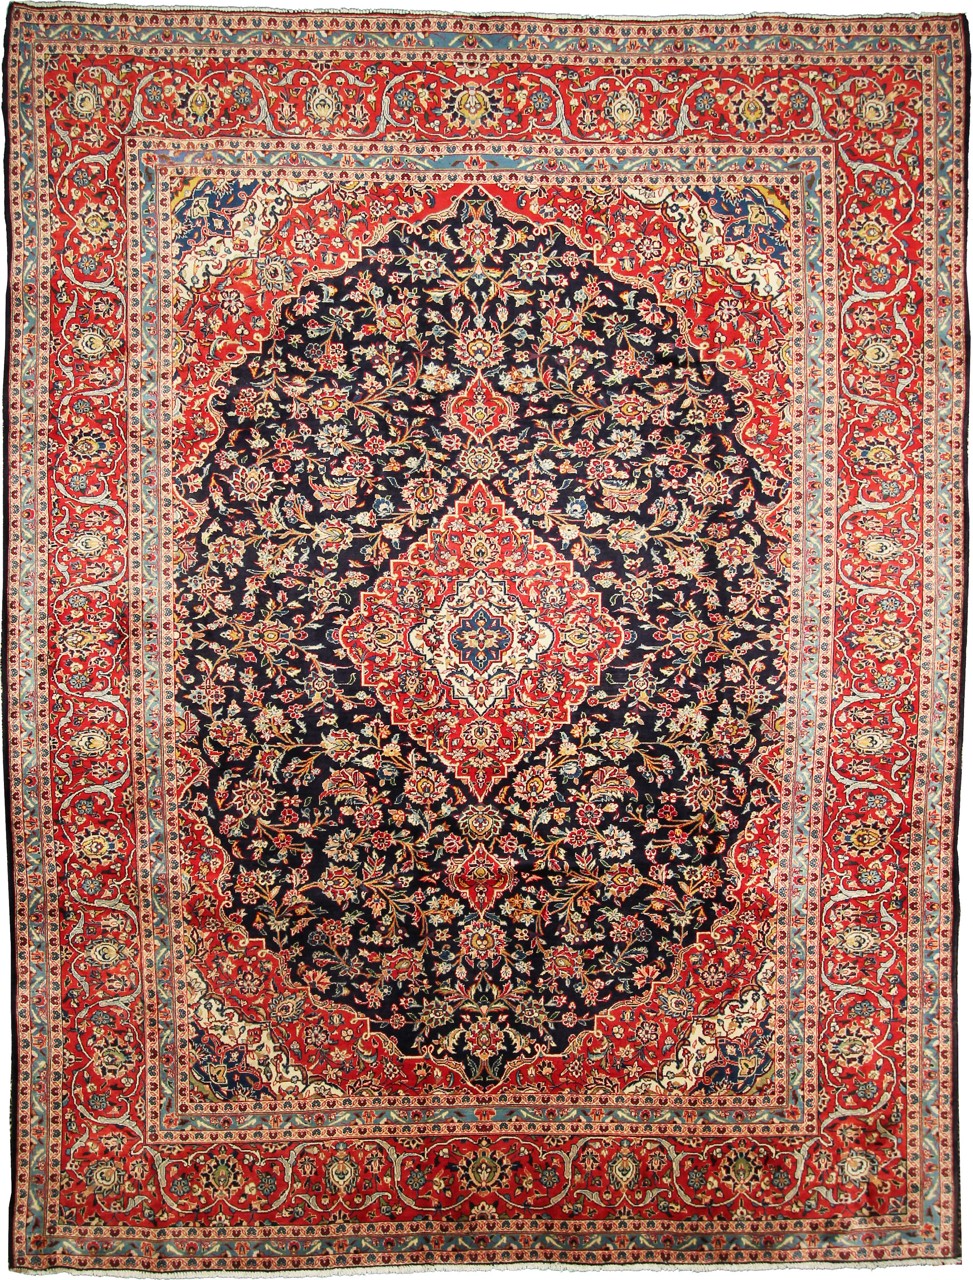 Persian Rug Keshan 12'4"x9'6" 12'4"x9'6", Persian Rug Knotted by hand